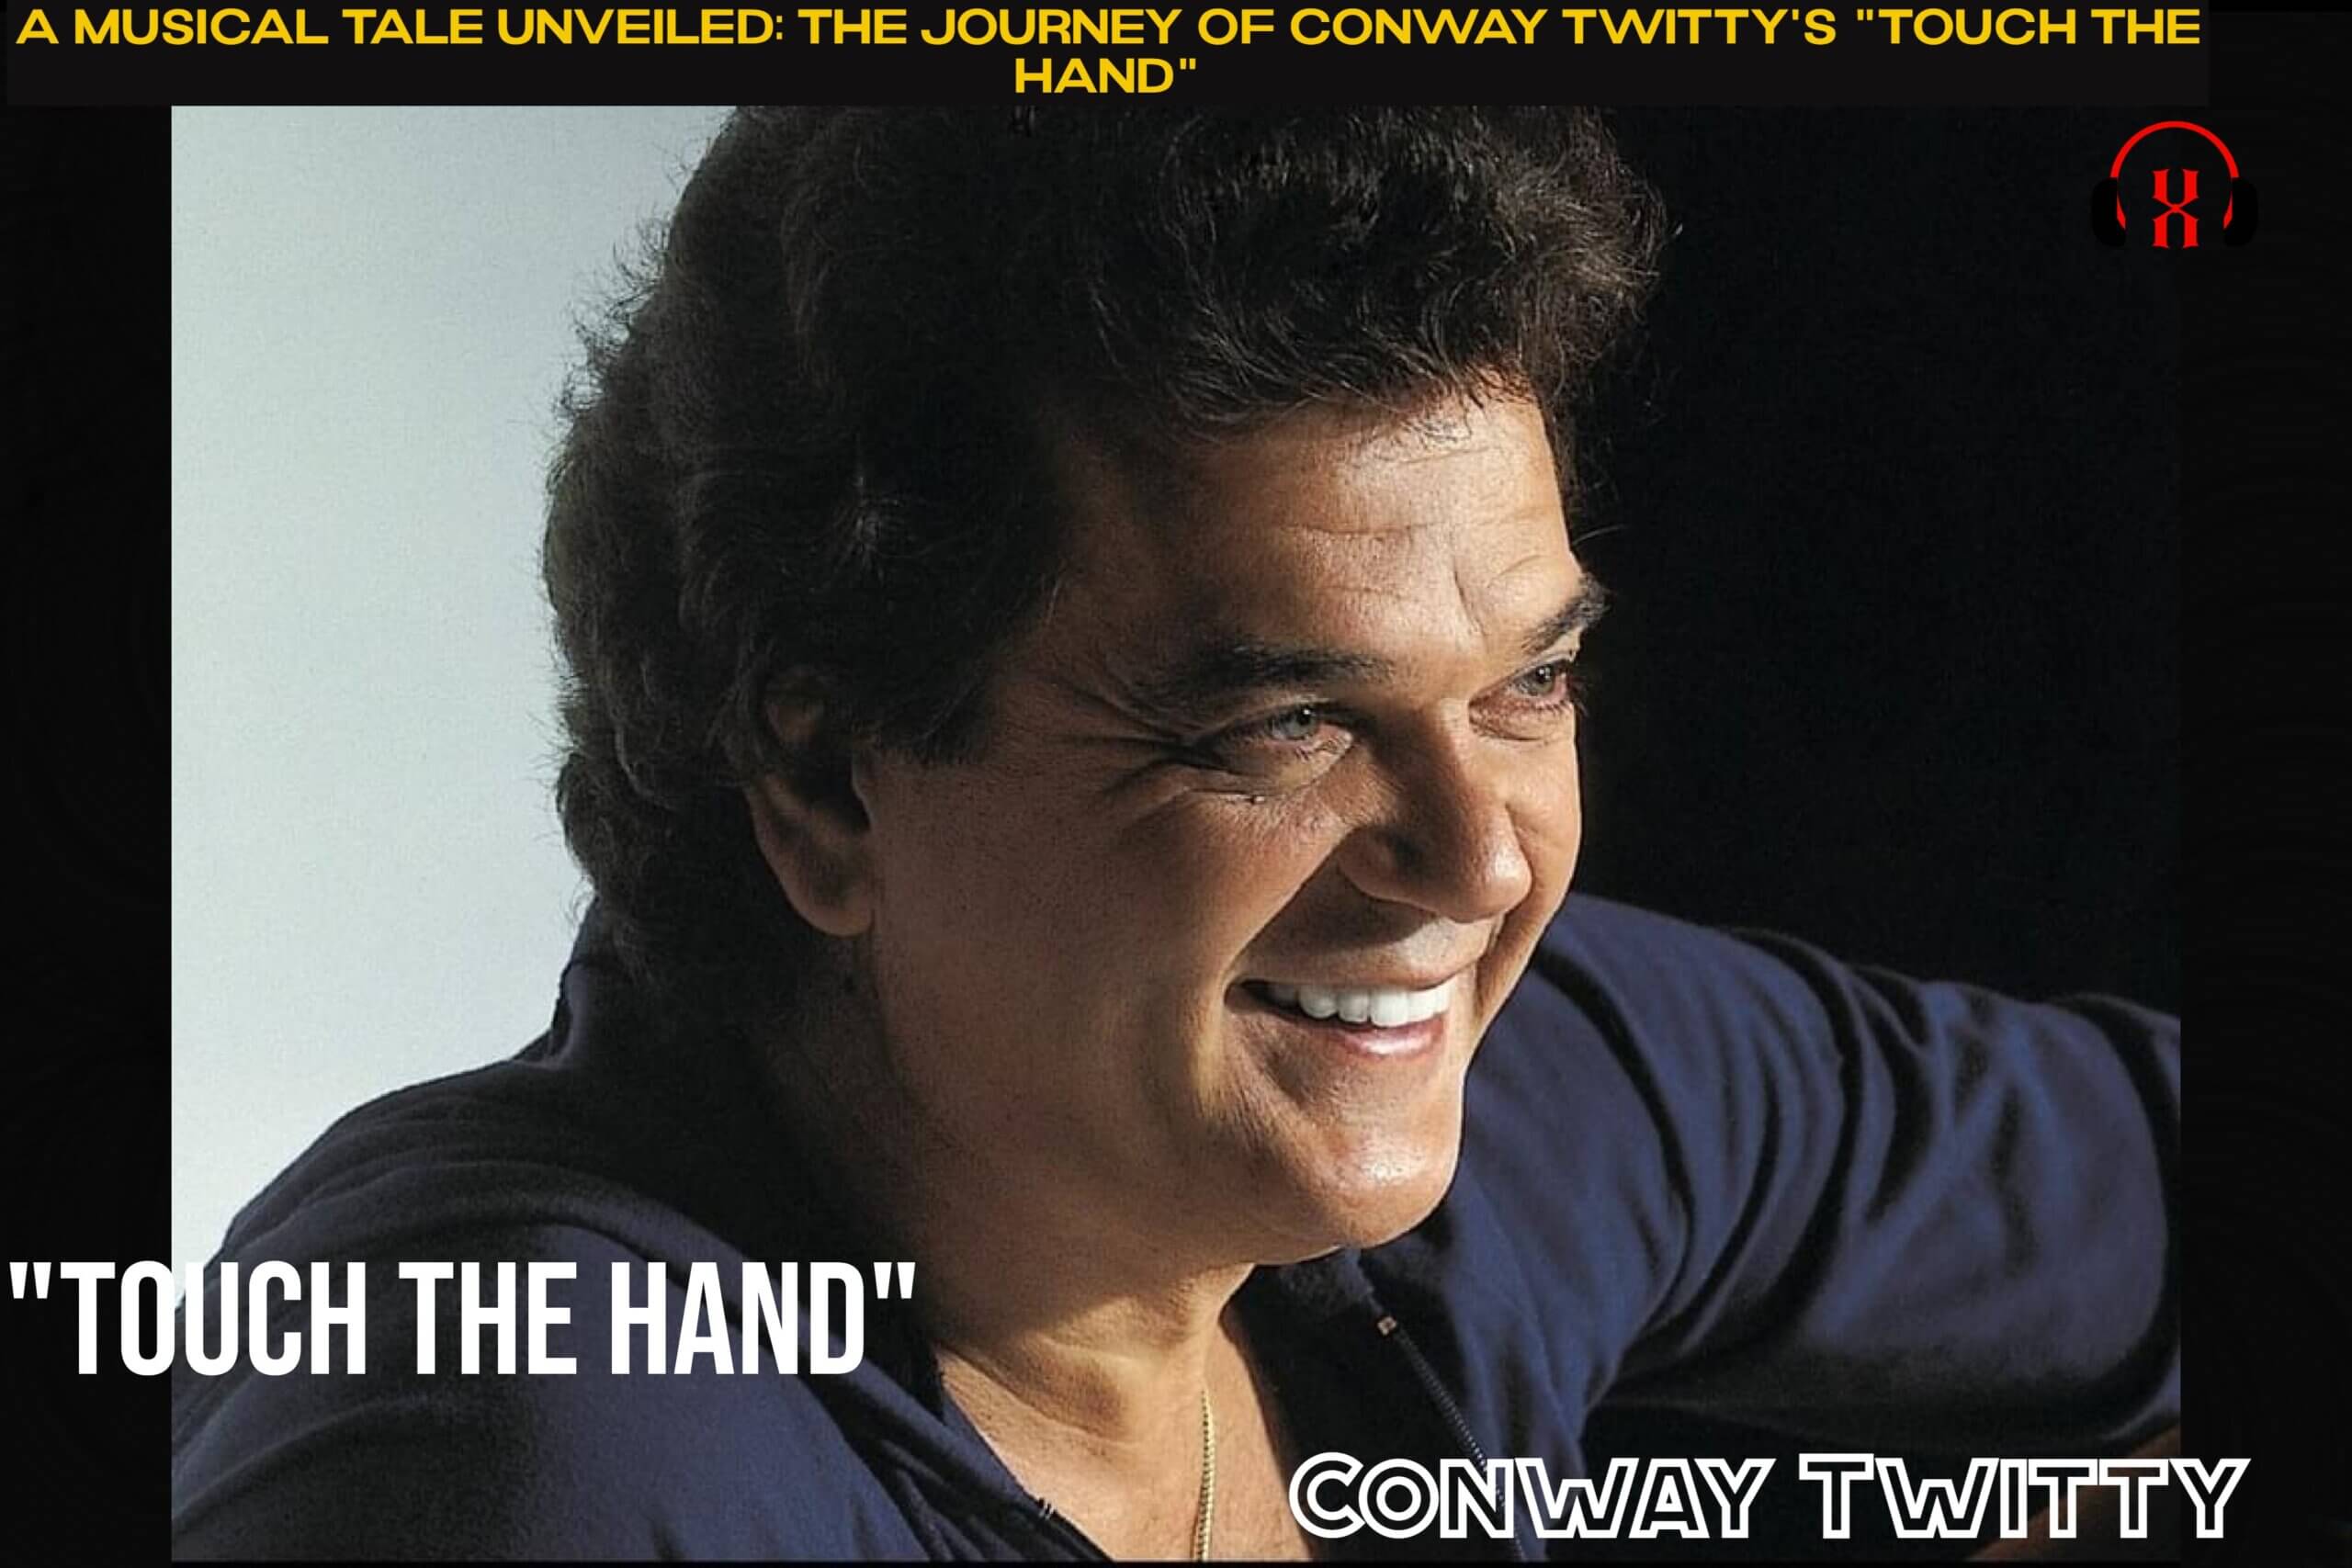 A Musical Tale Unveiled: The Journey of Conway Twitty’s “Touch The Hand”